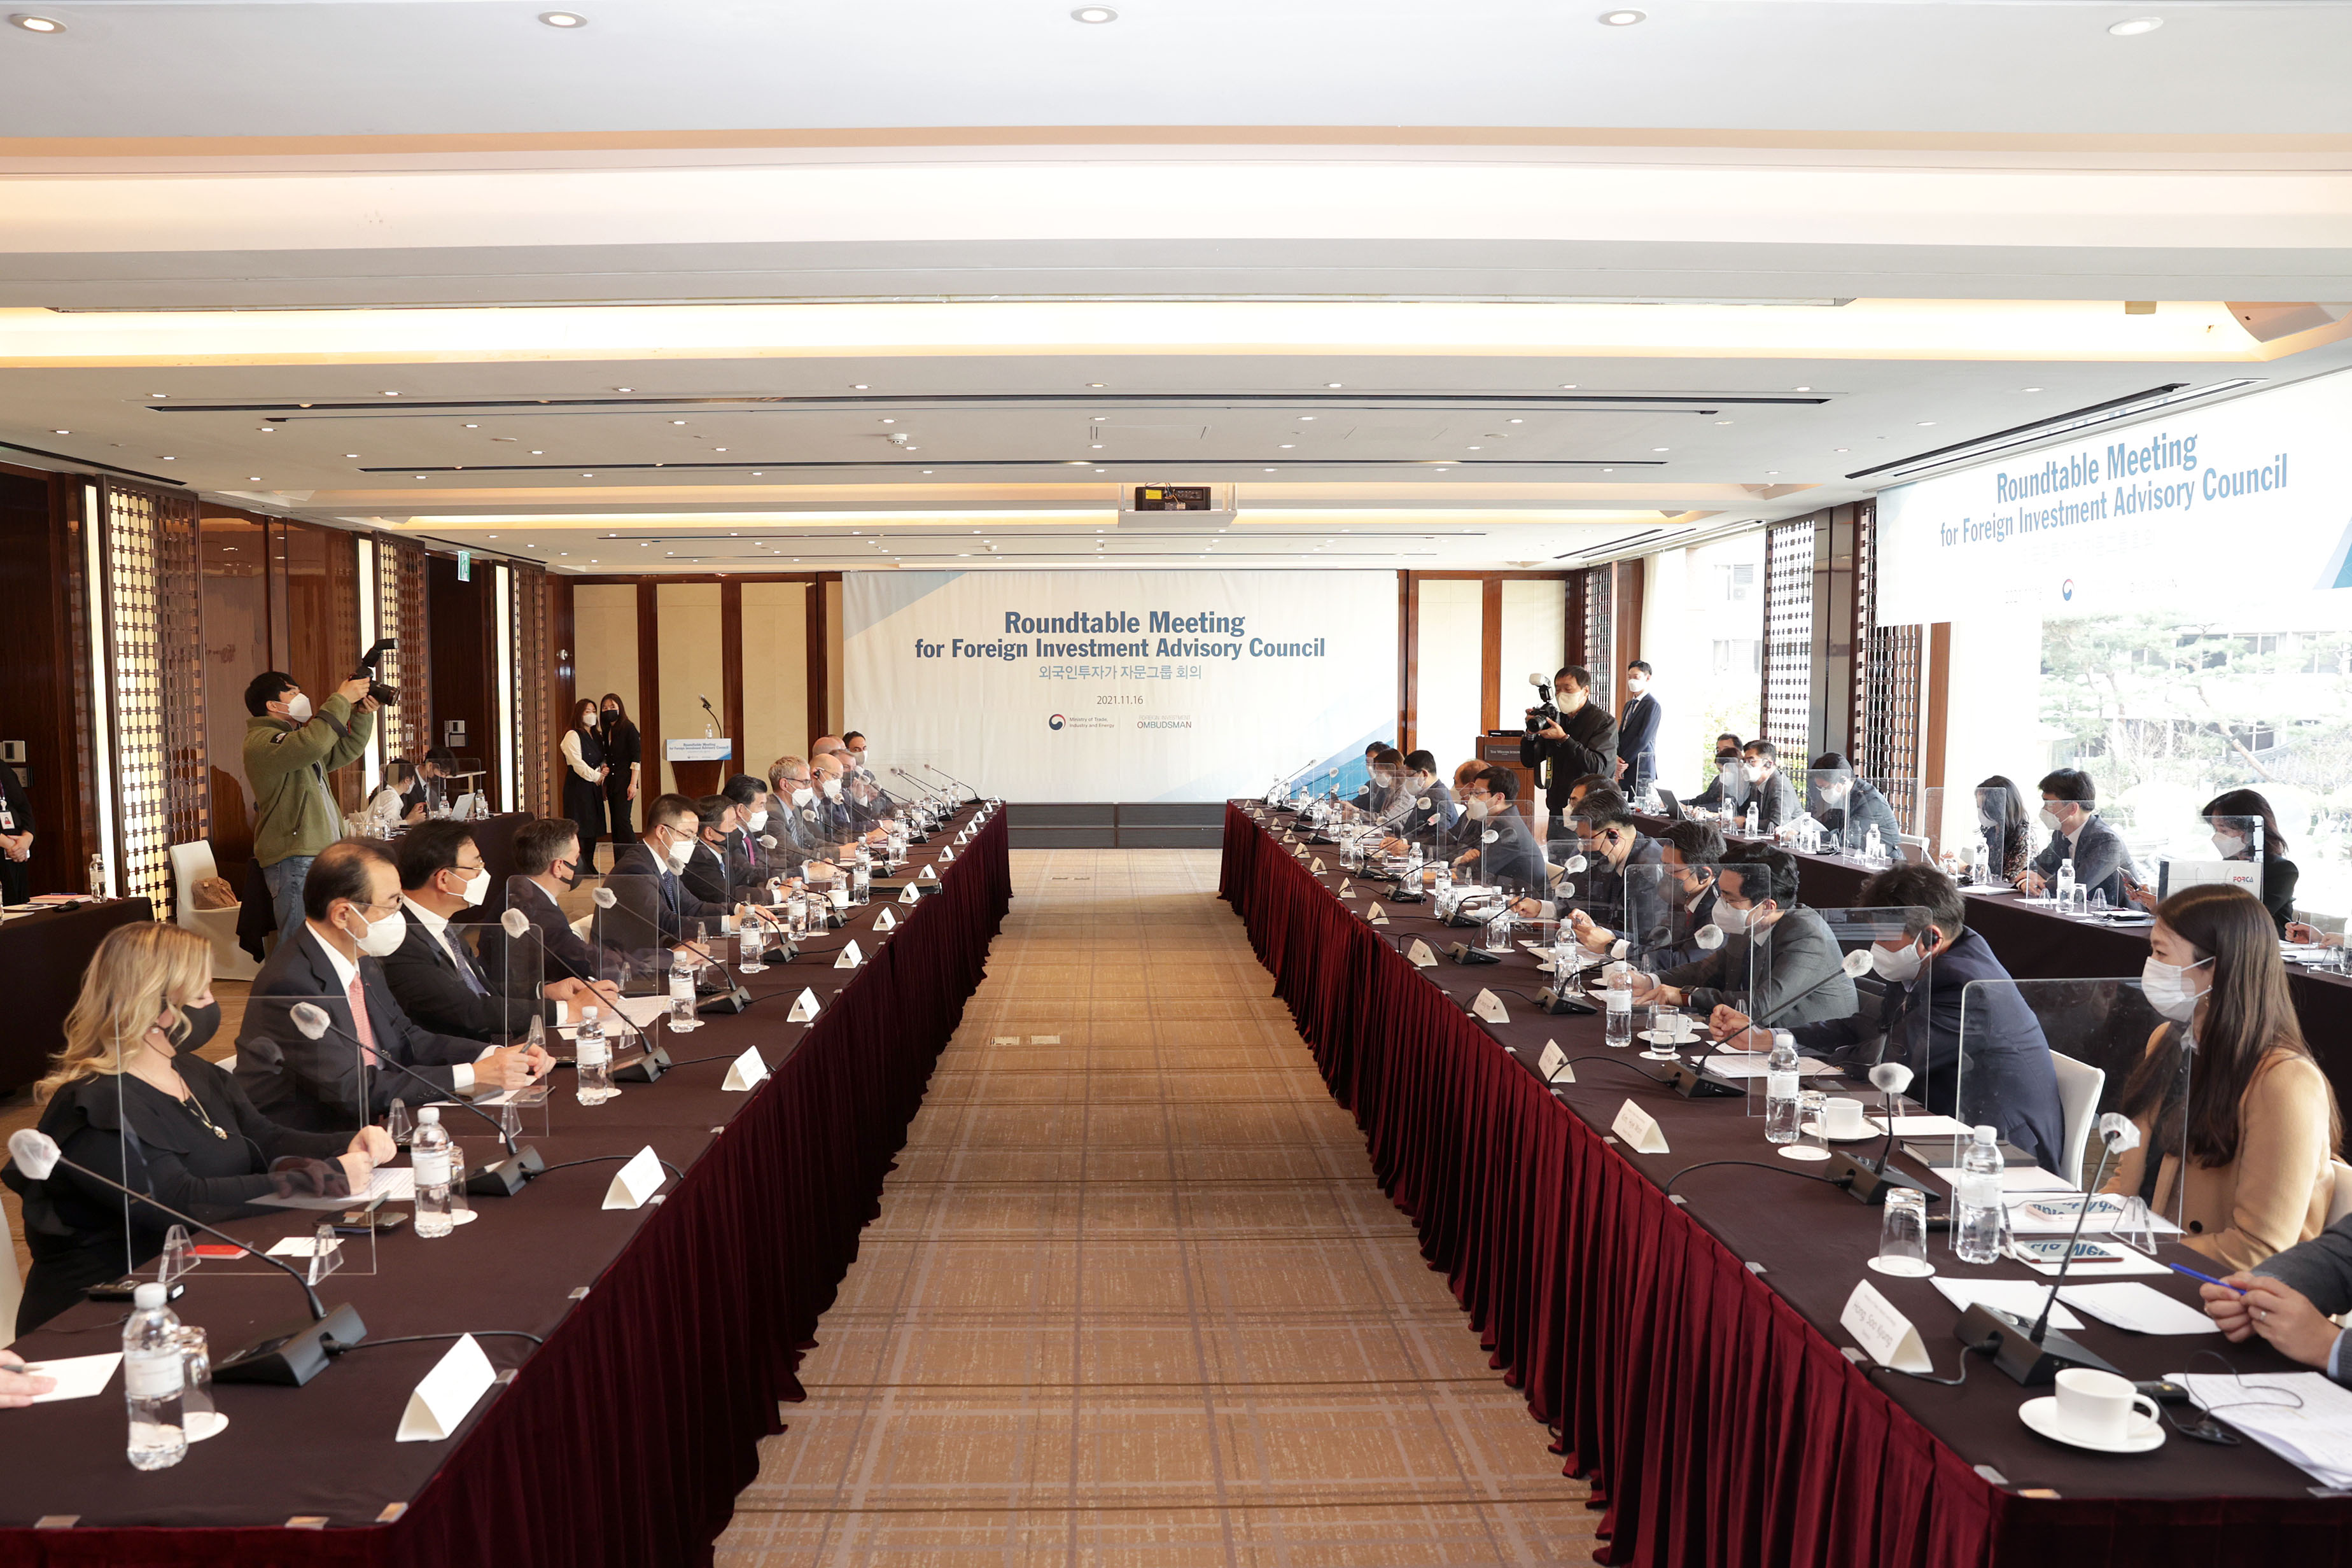 Roundtable Meeting for Foreign Investment Advisory Council